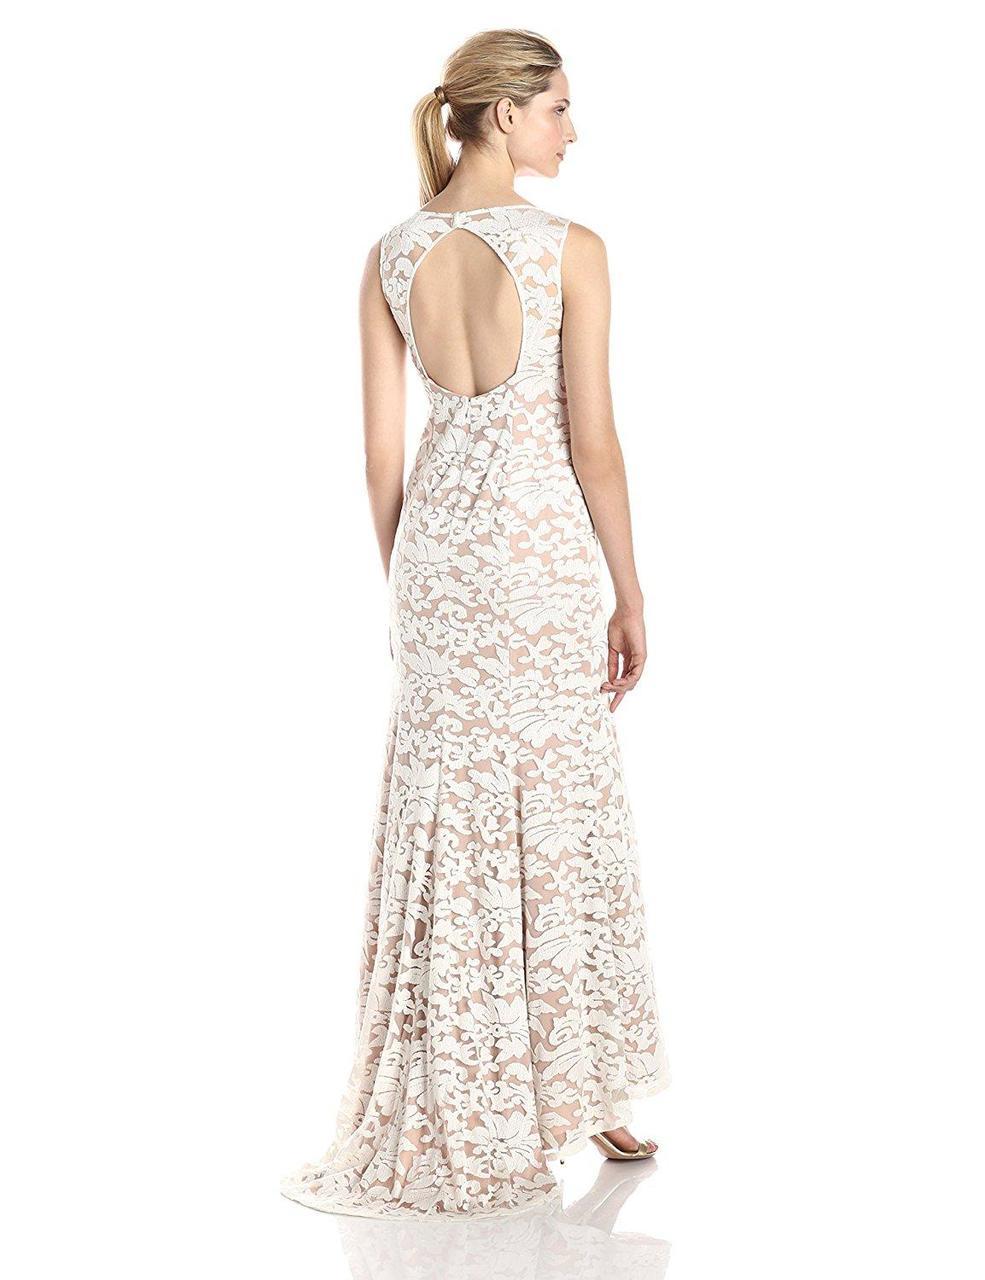 Adrianna Papell - 91906310 Embroidered Sleeveless Evening Gown in White and Neutral